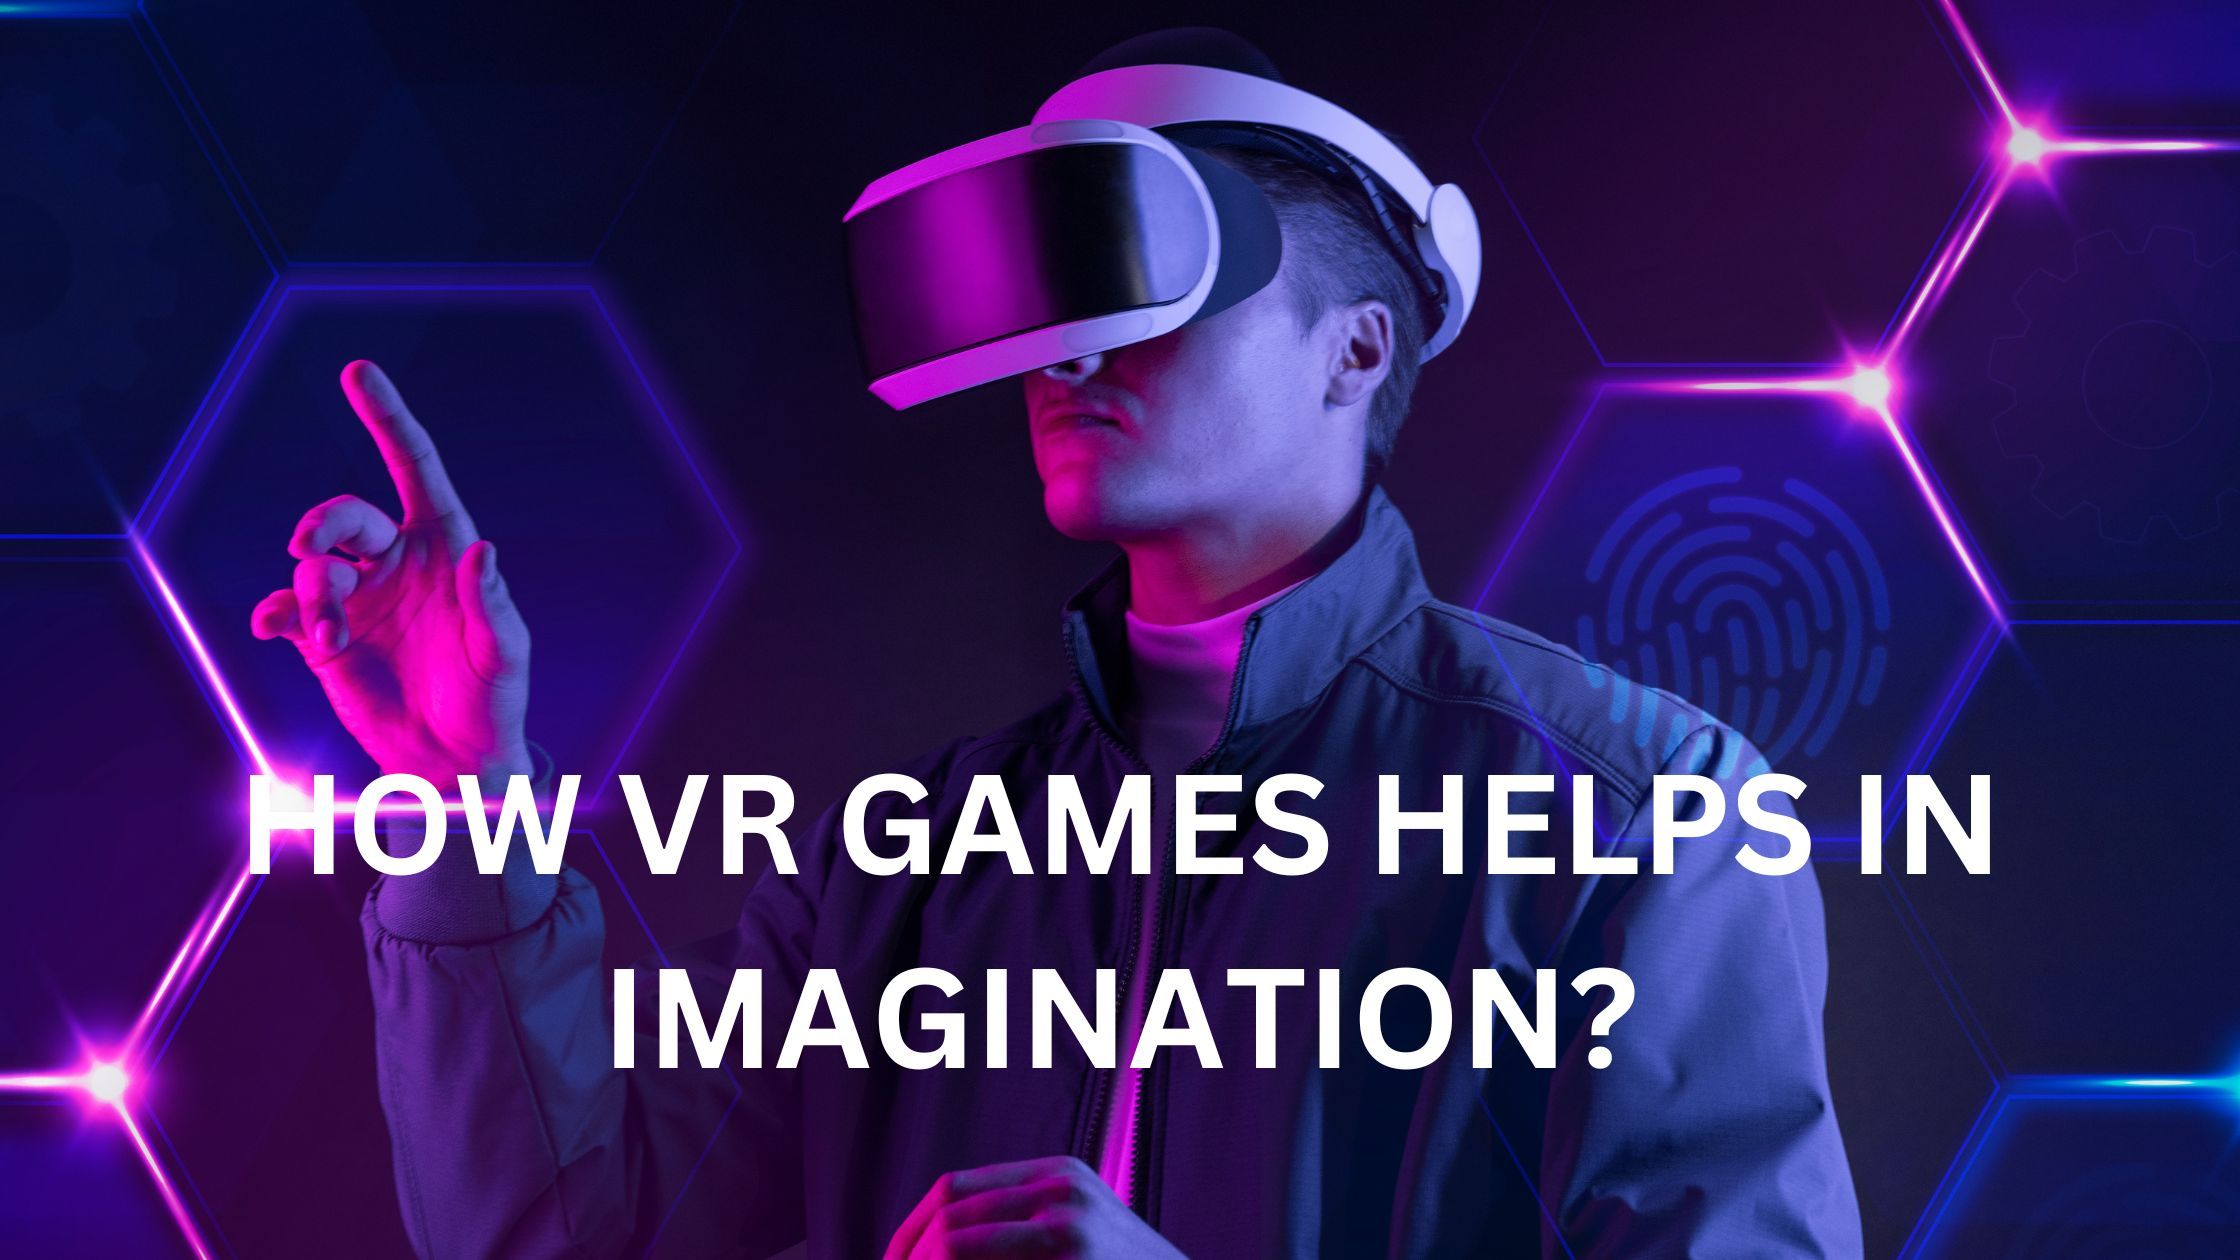 HOW VR GAMES HELPS IN IMAGINATION